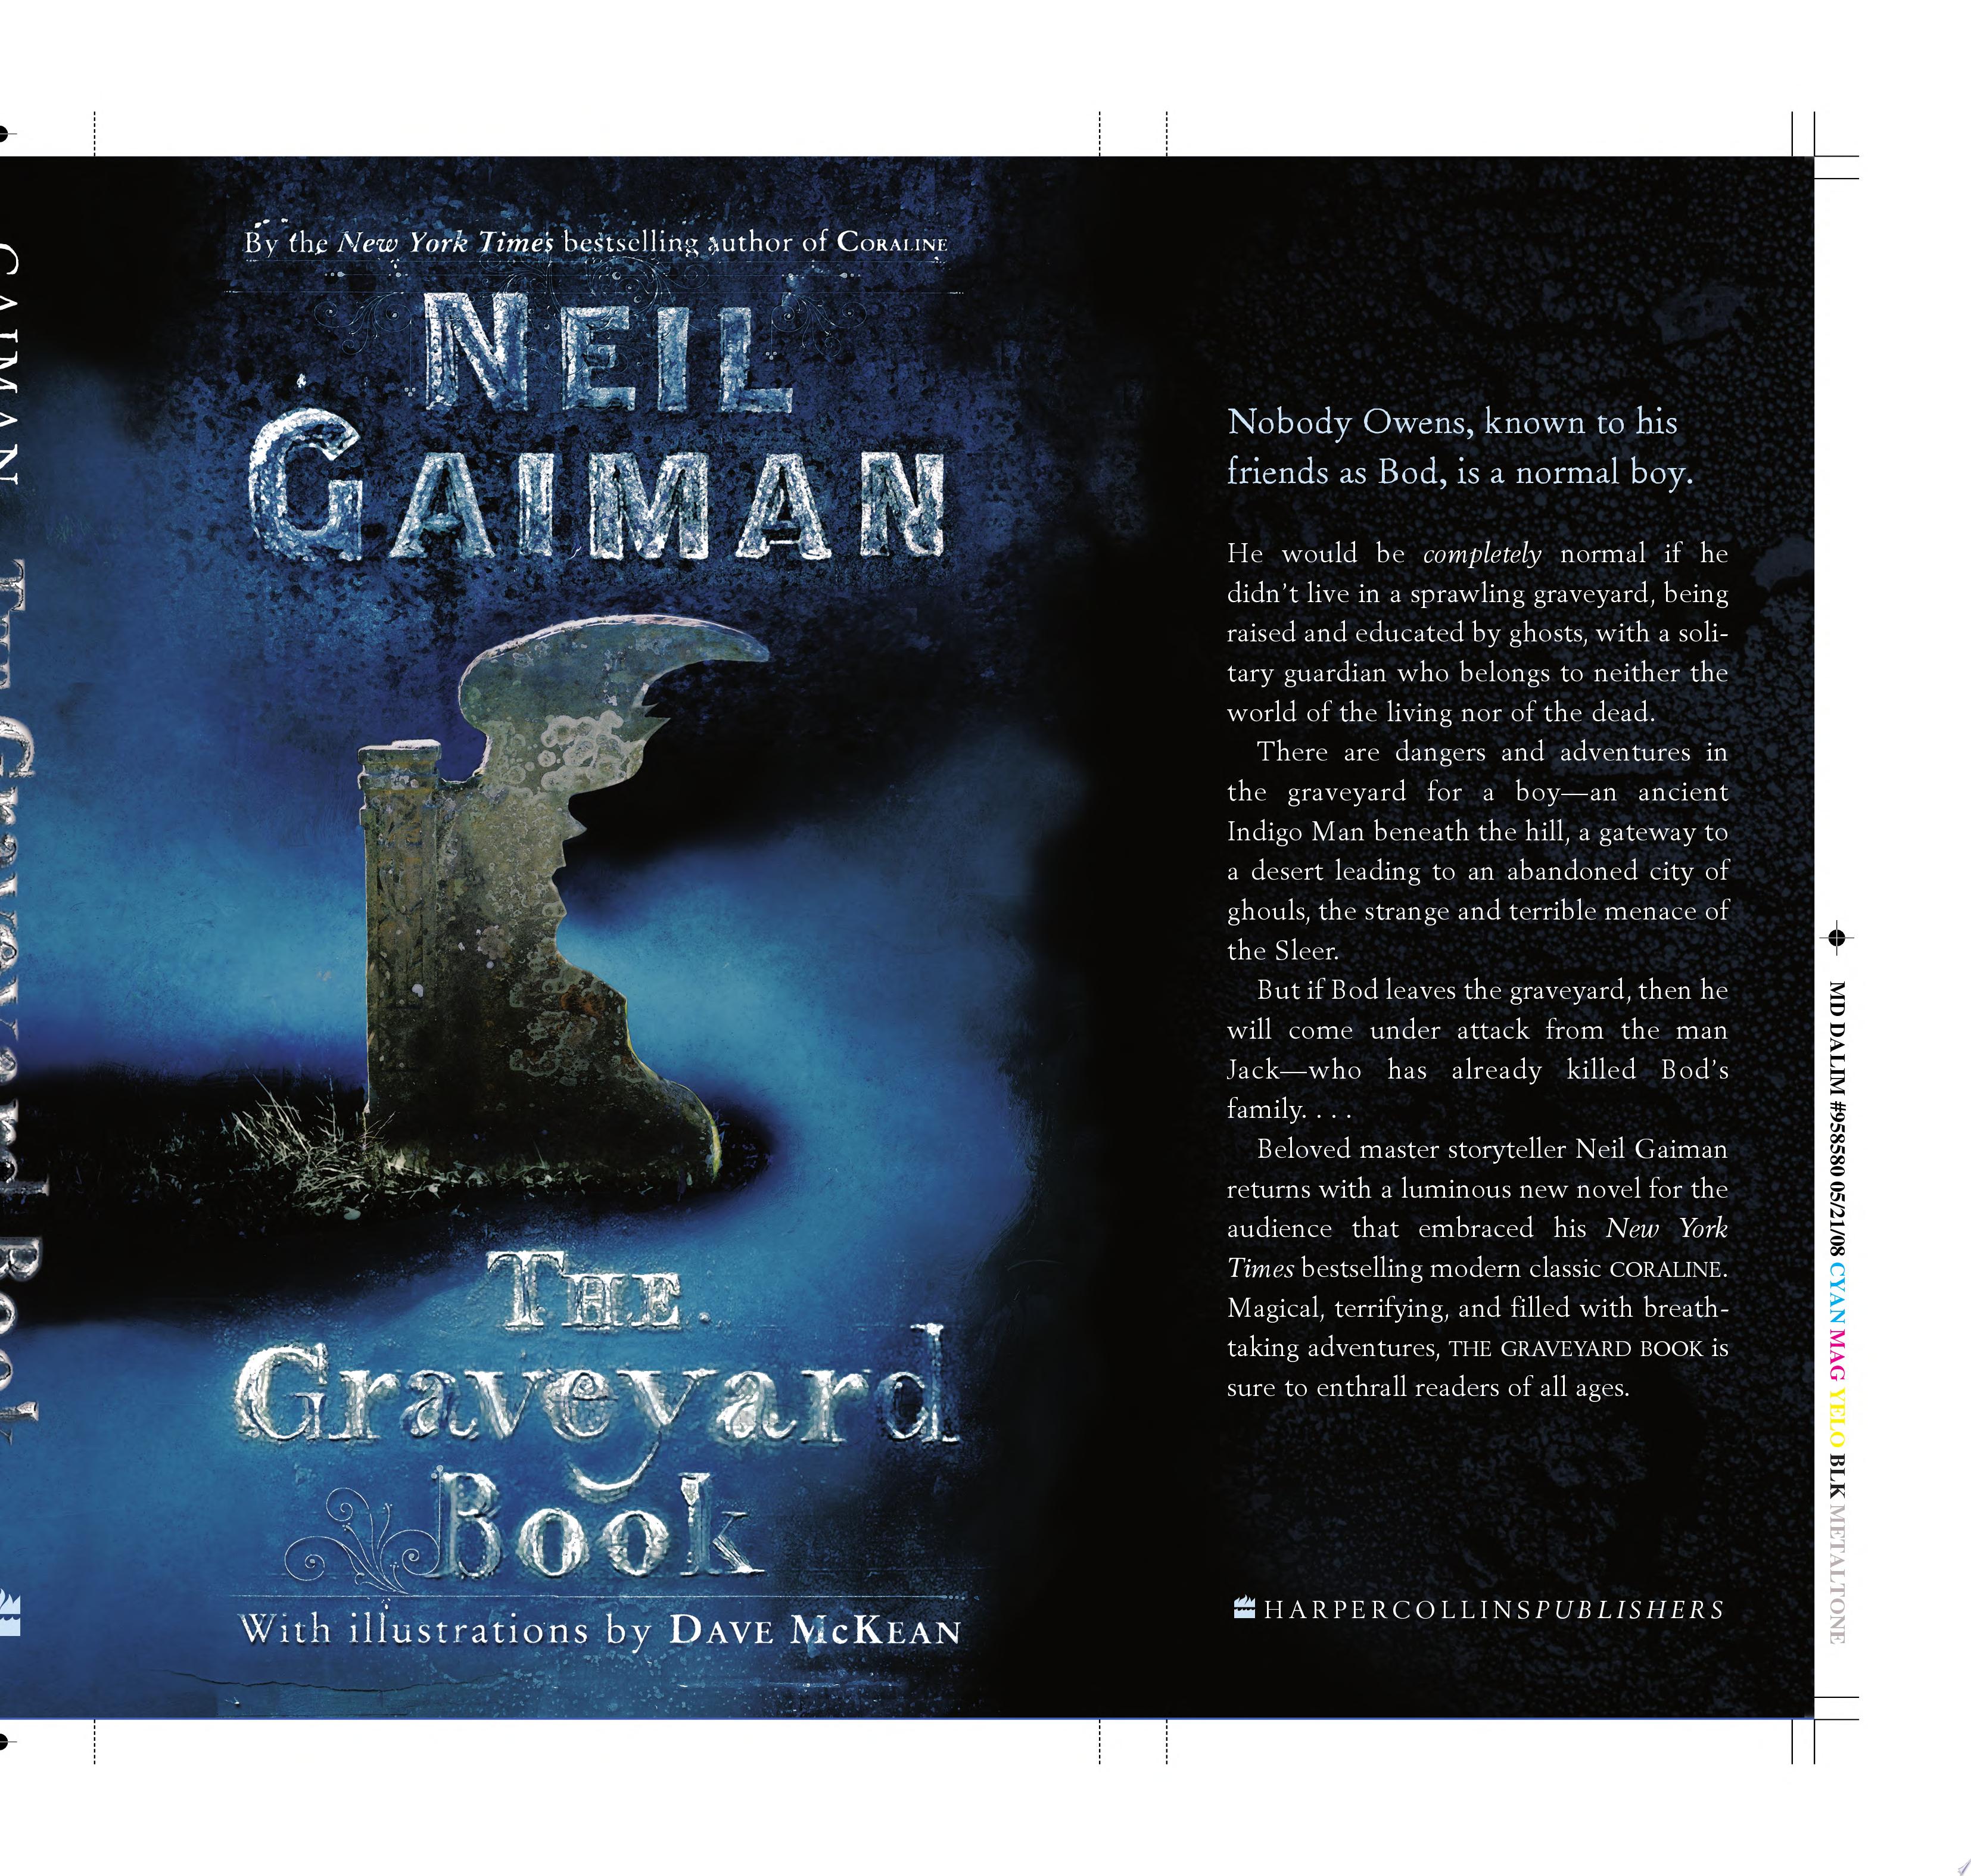 Image for "The Graveyard Book"